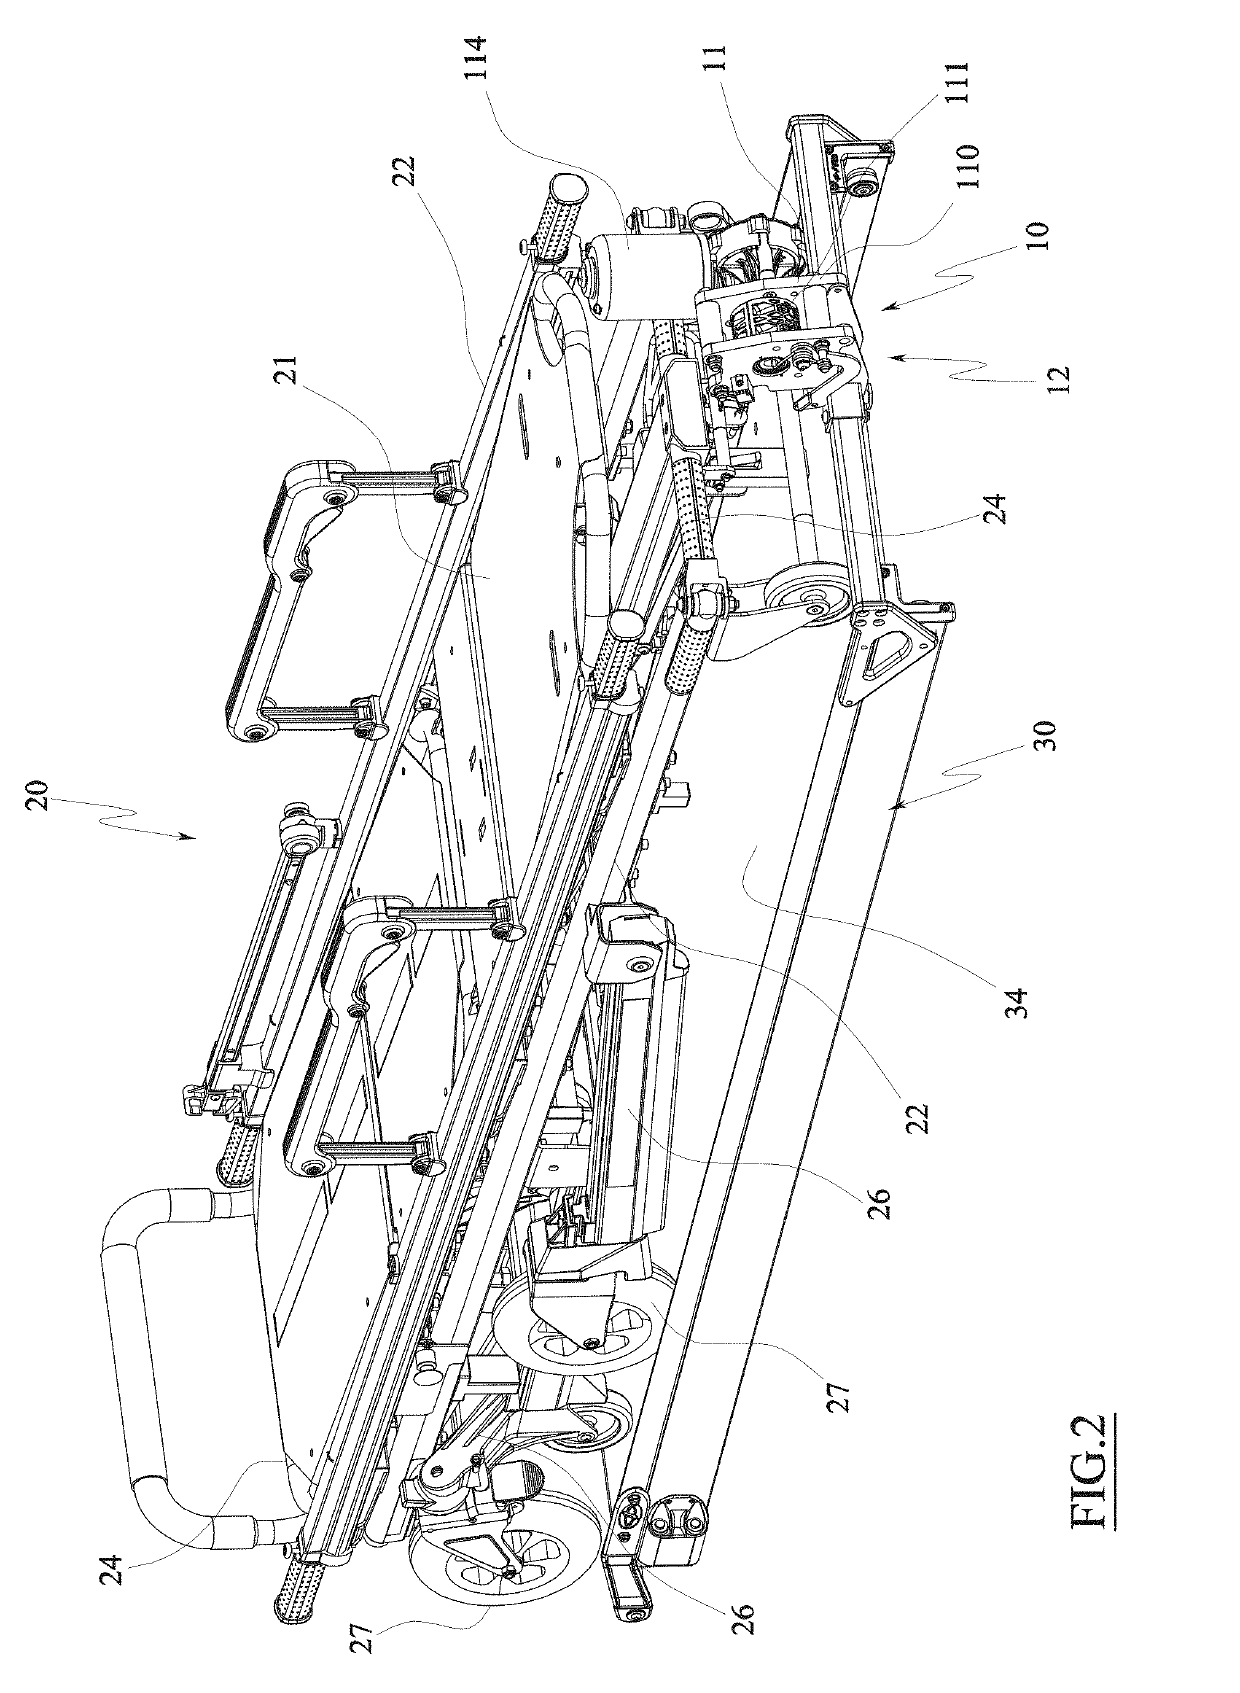 Auxiliary loading device of a stretcher